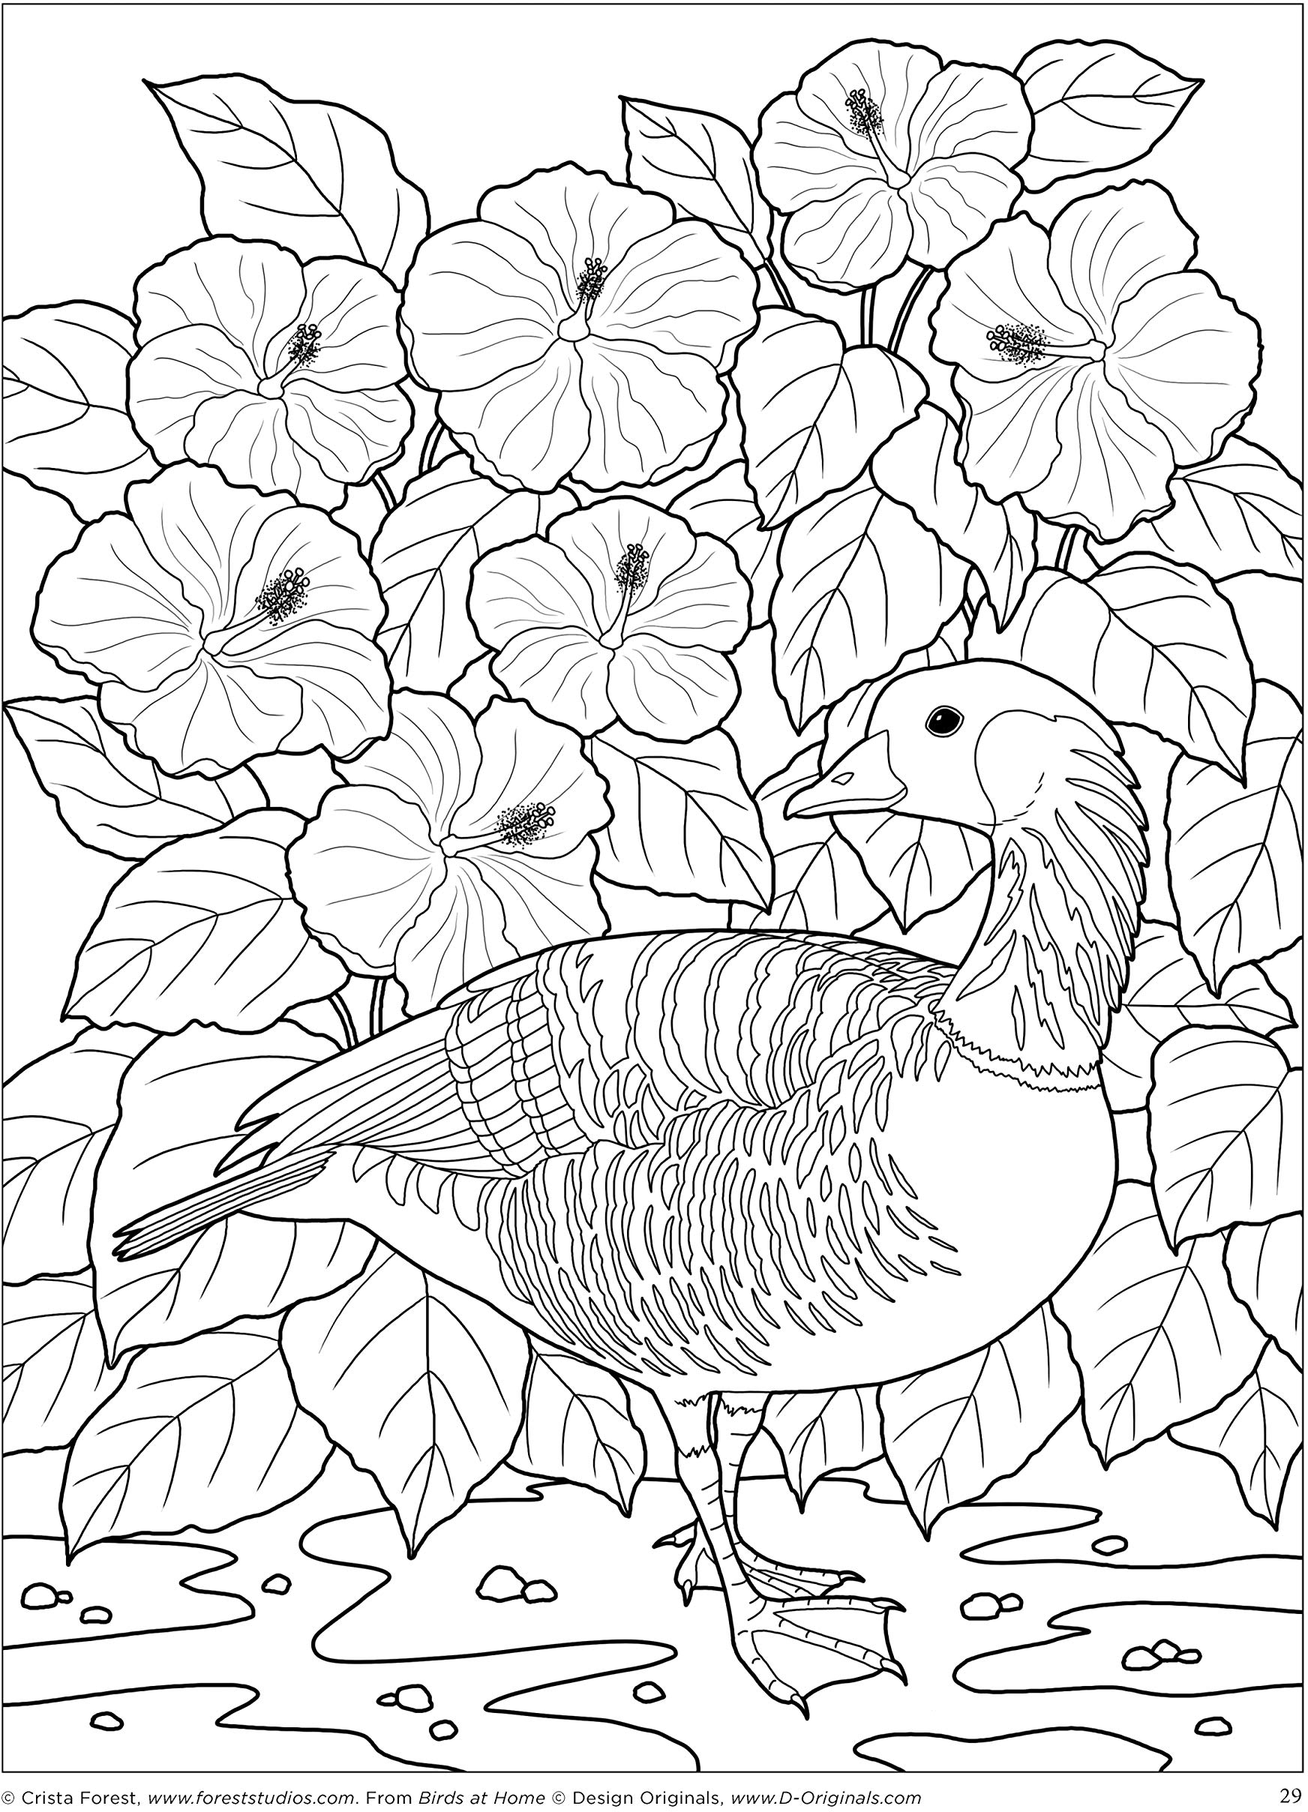 State Birds And Flowers Coloring Book 1